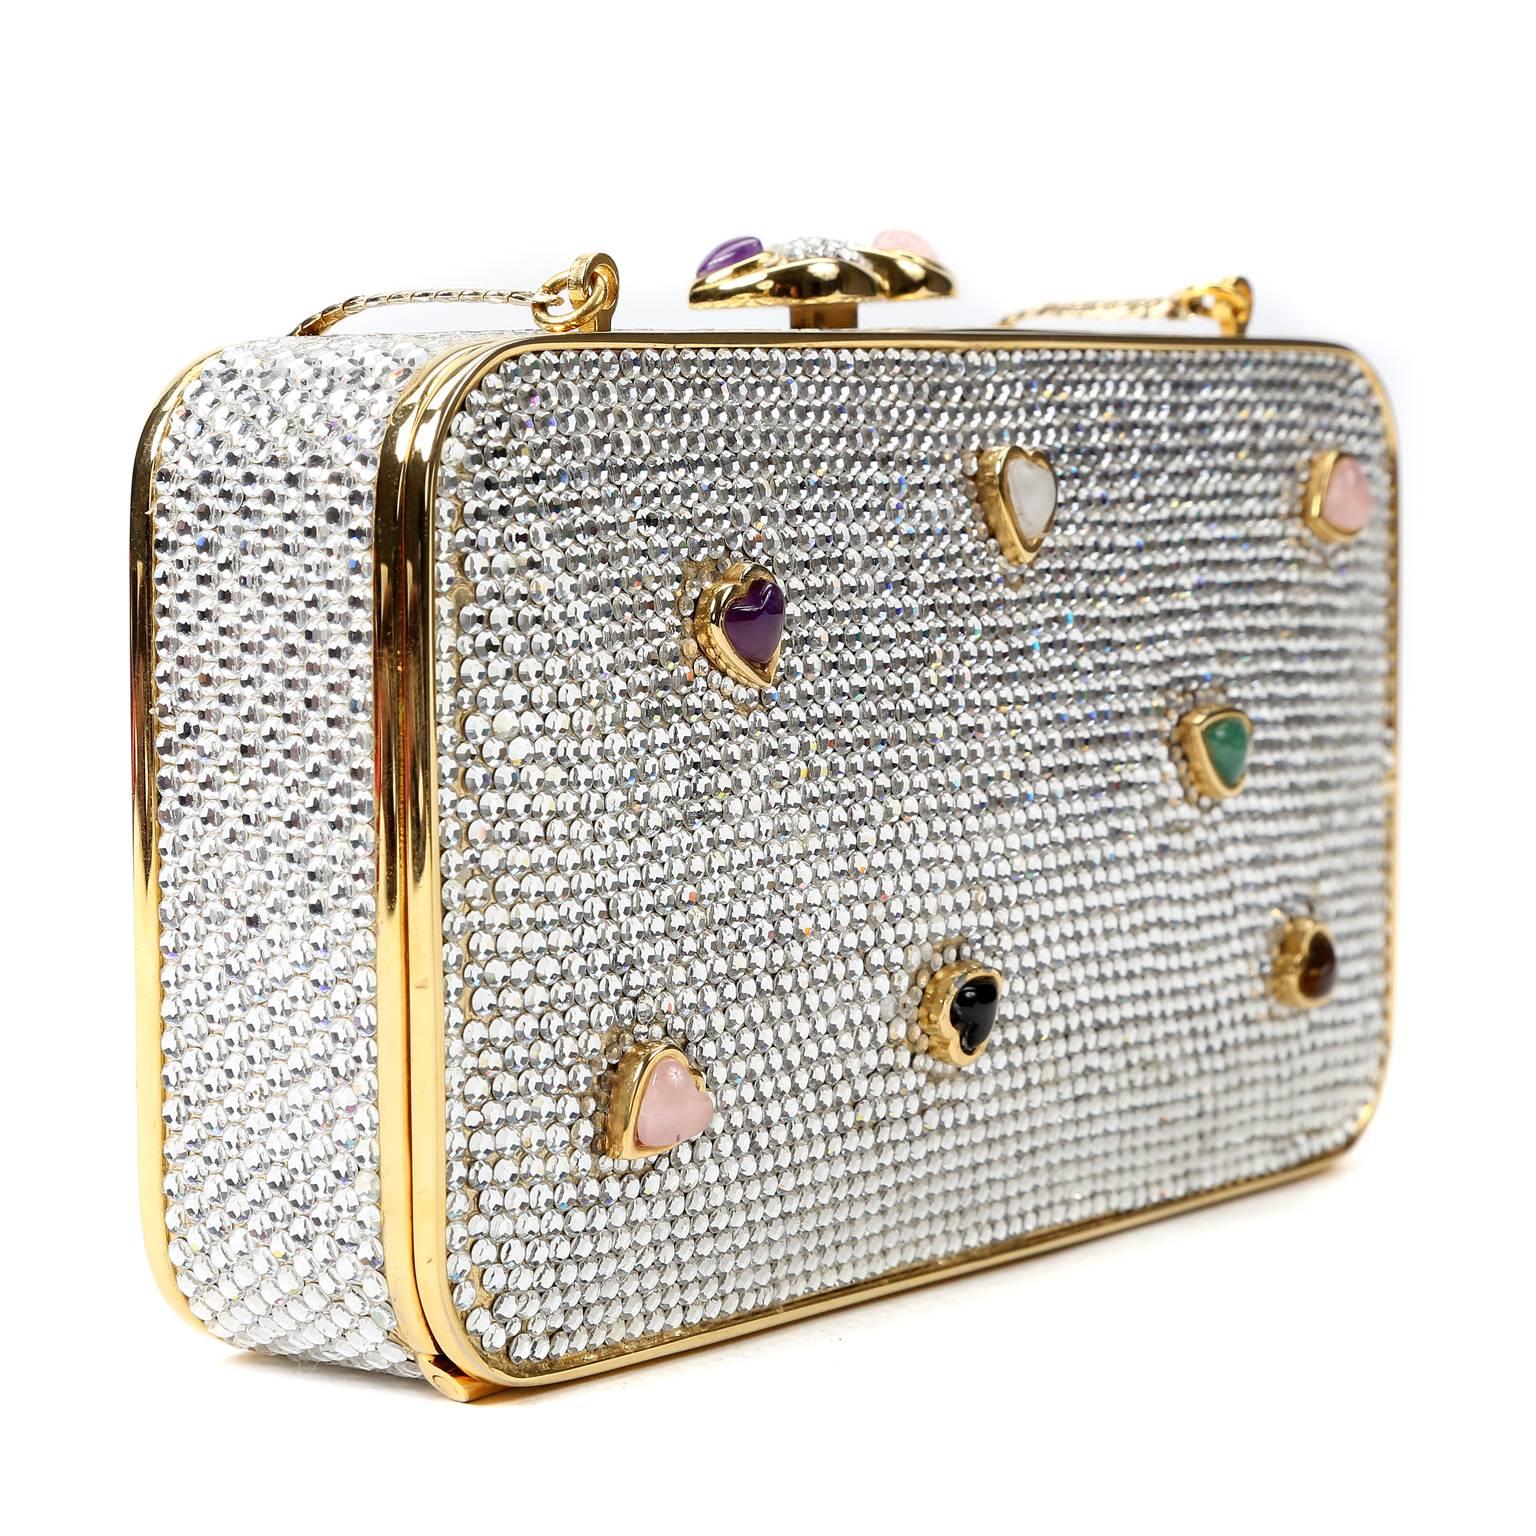 Judith Leiber Crystal Hearts Minaudiere- PRISTINE;  appears never carried.  The stunning jeweled piece is uniquely beautiful and becomes the focal point of any ensemble.
 
Gold framed clutch is encrusted with crystals on all sides.  The front is